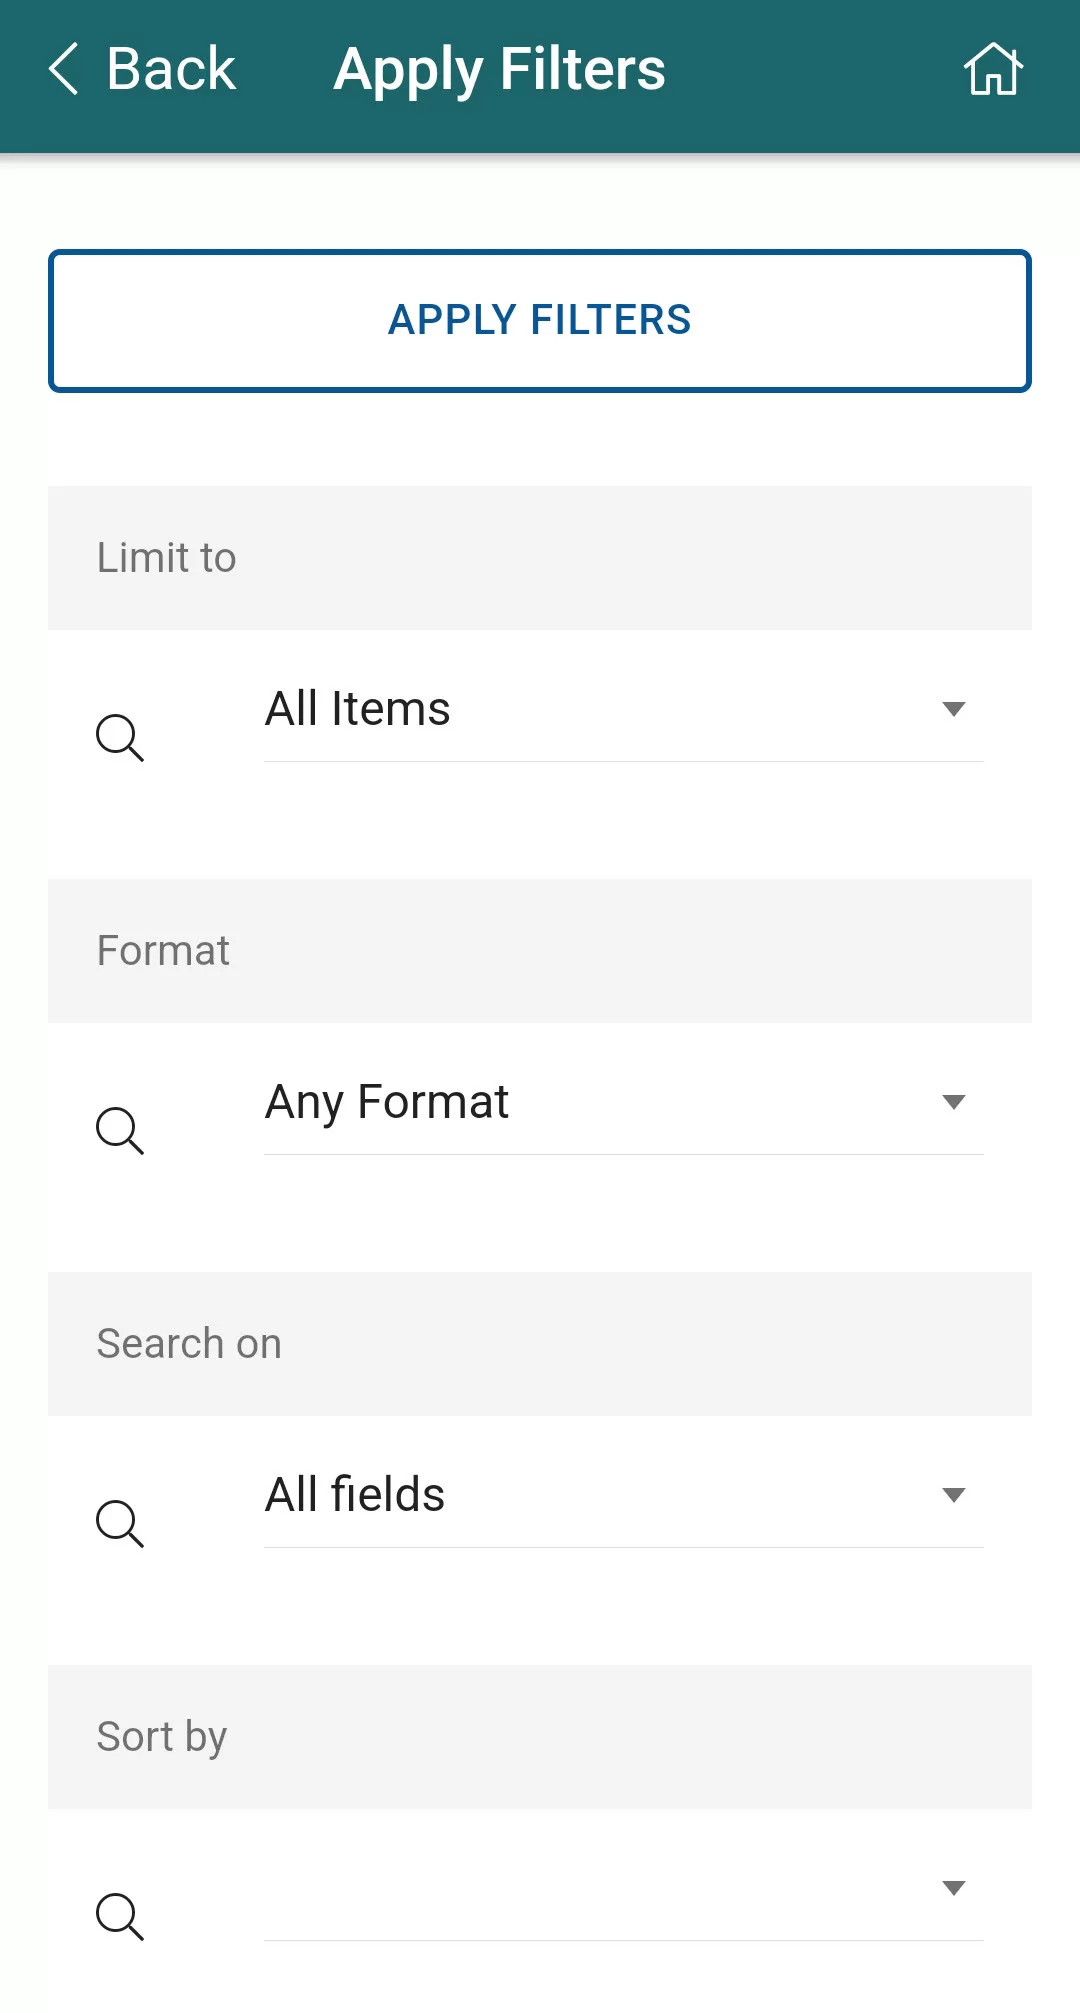 Search filter options: Limit to, format, search on, and sort by. Screenshot.